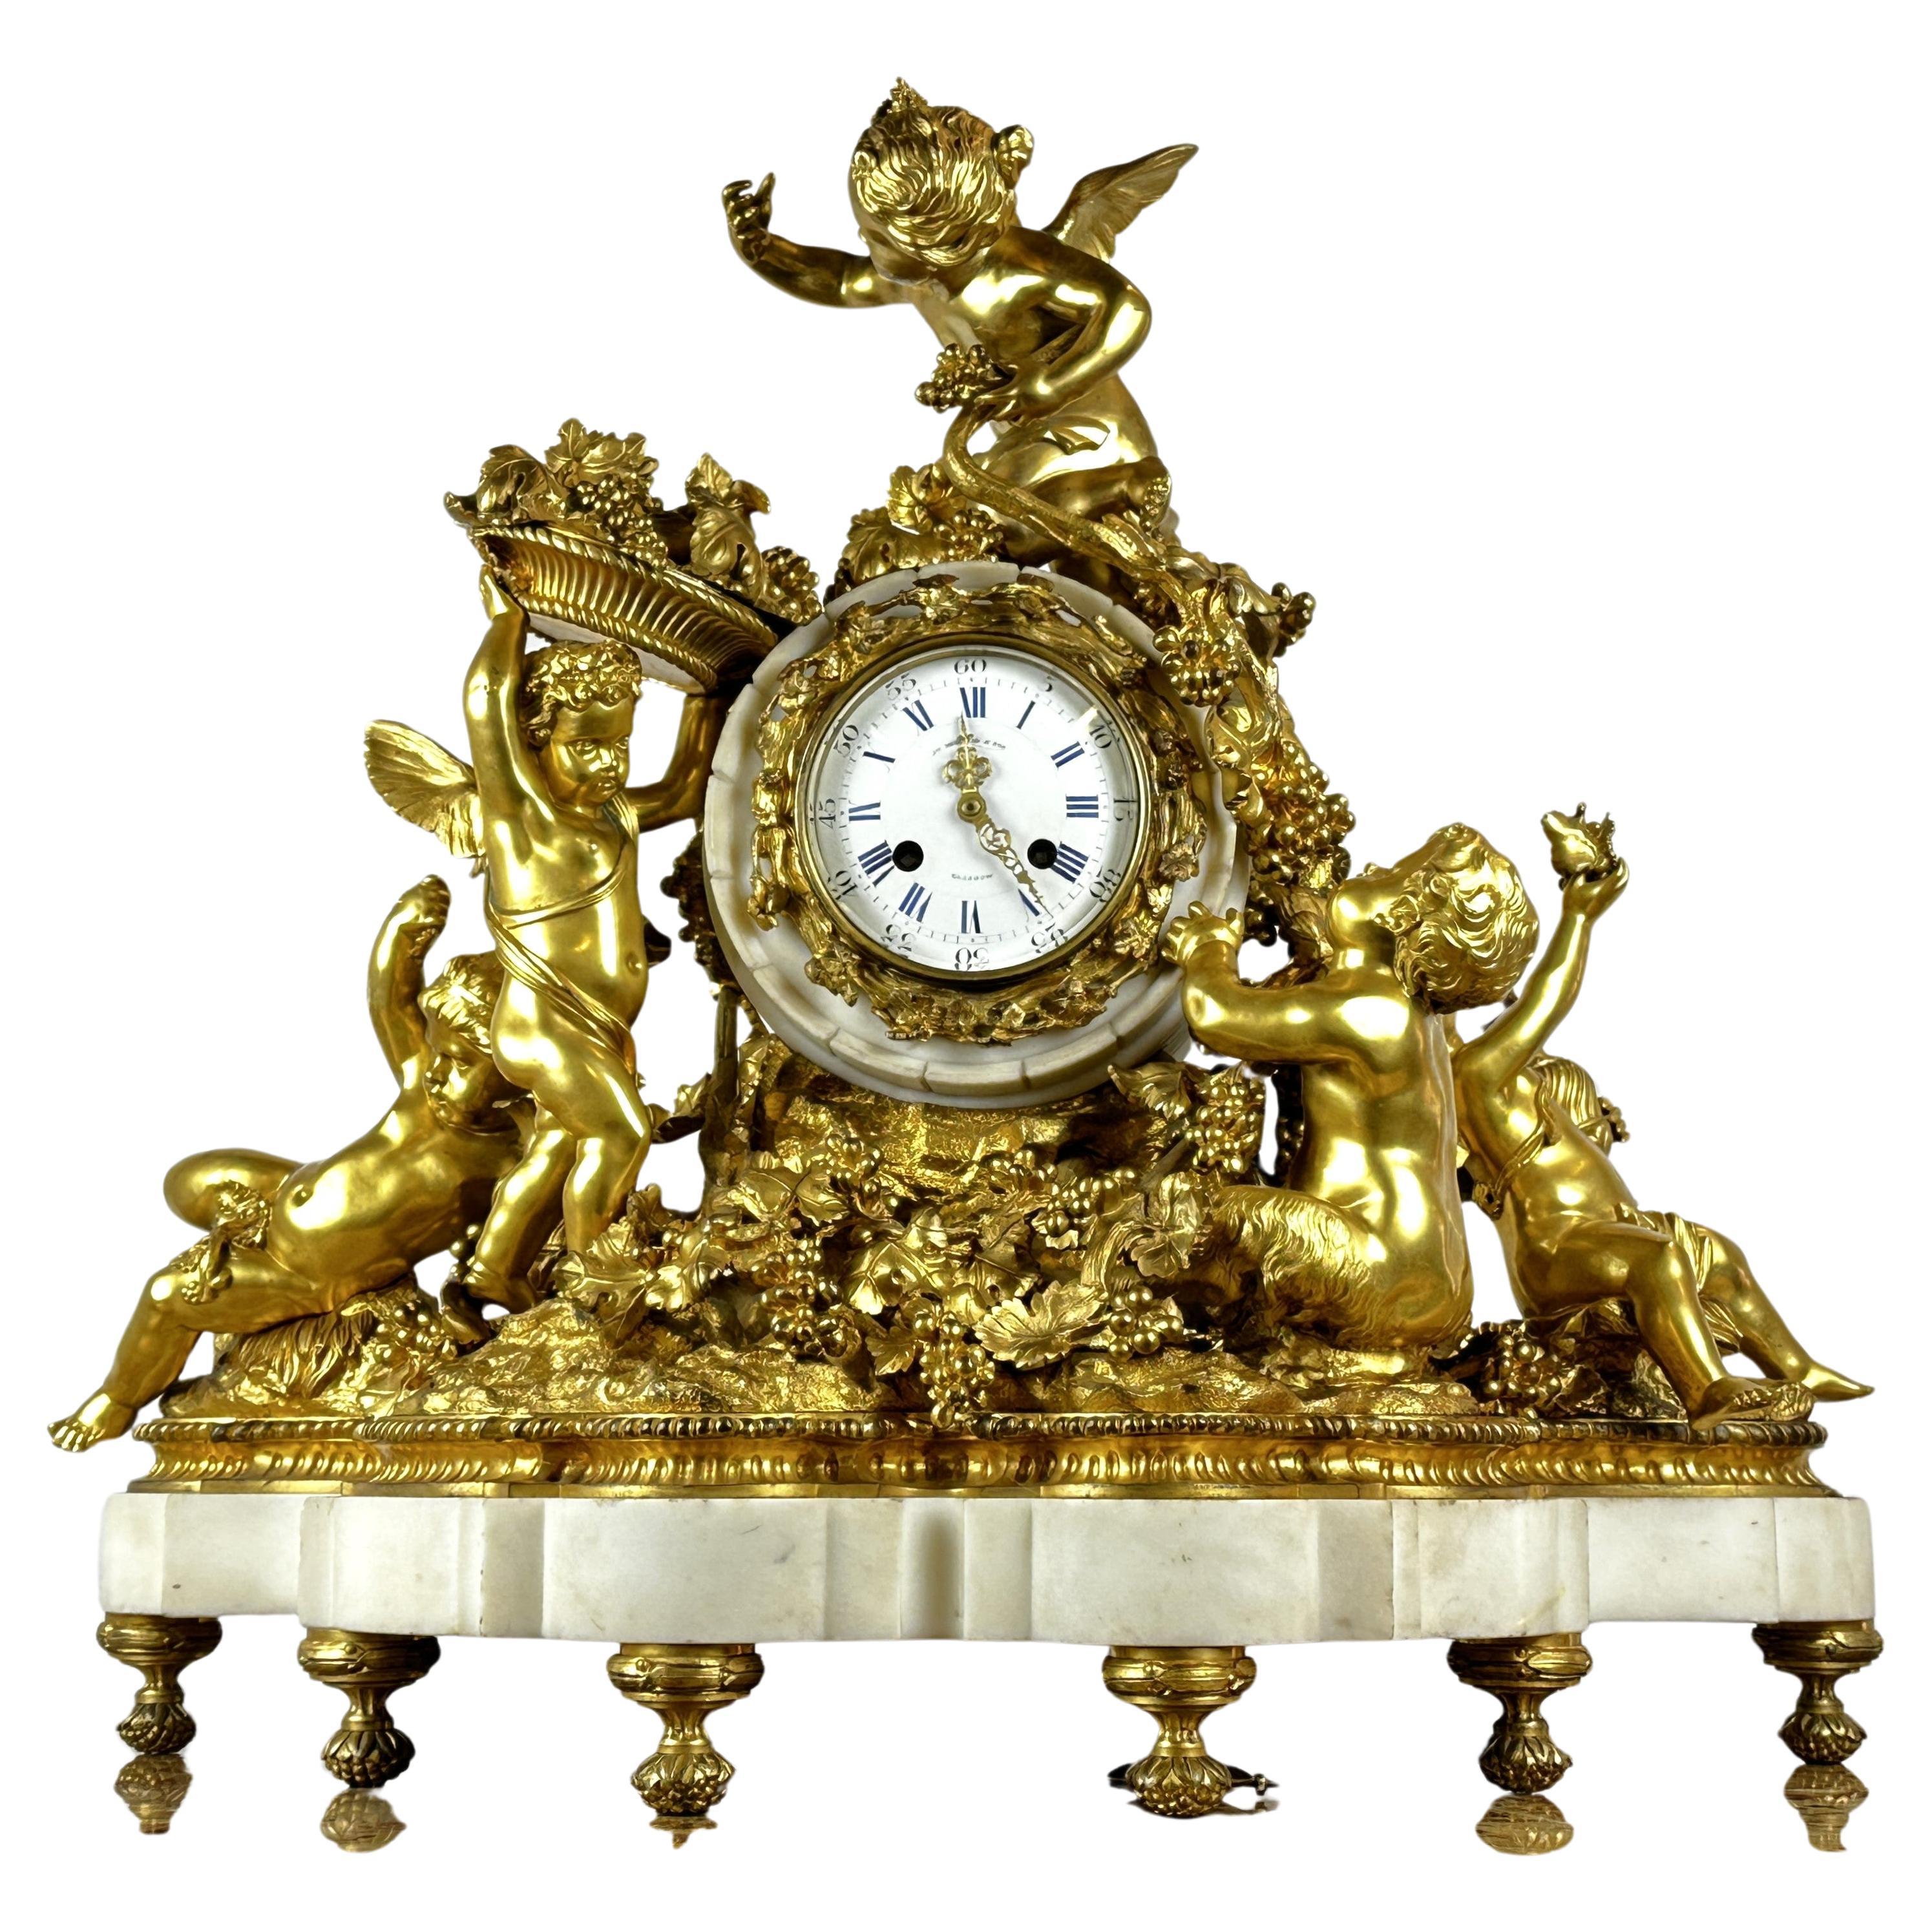 Important Lerolle Freres Clock 5 Putti Figures 19th Century For Sale